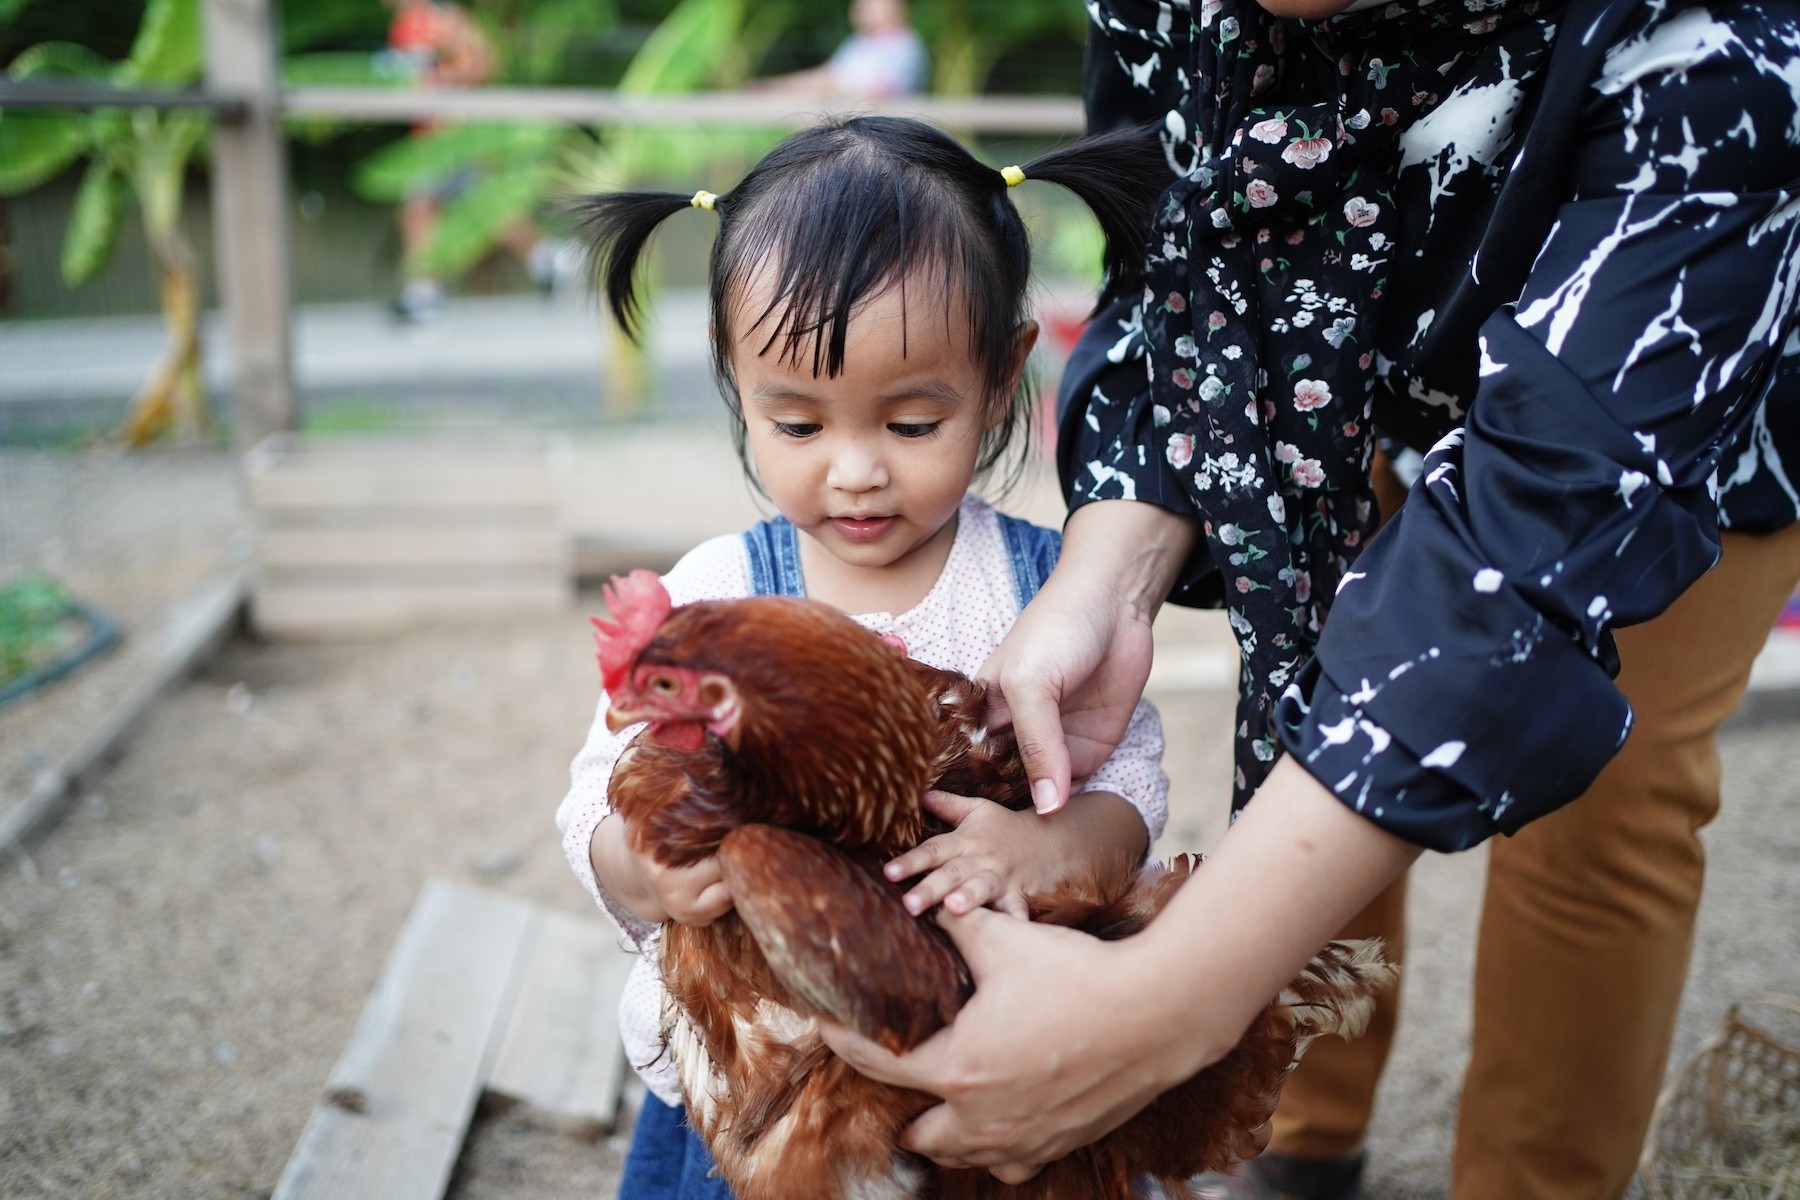 A little girl excitedly holds her pet chicken with the help of a parent